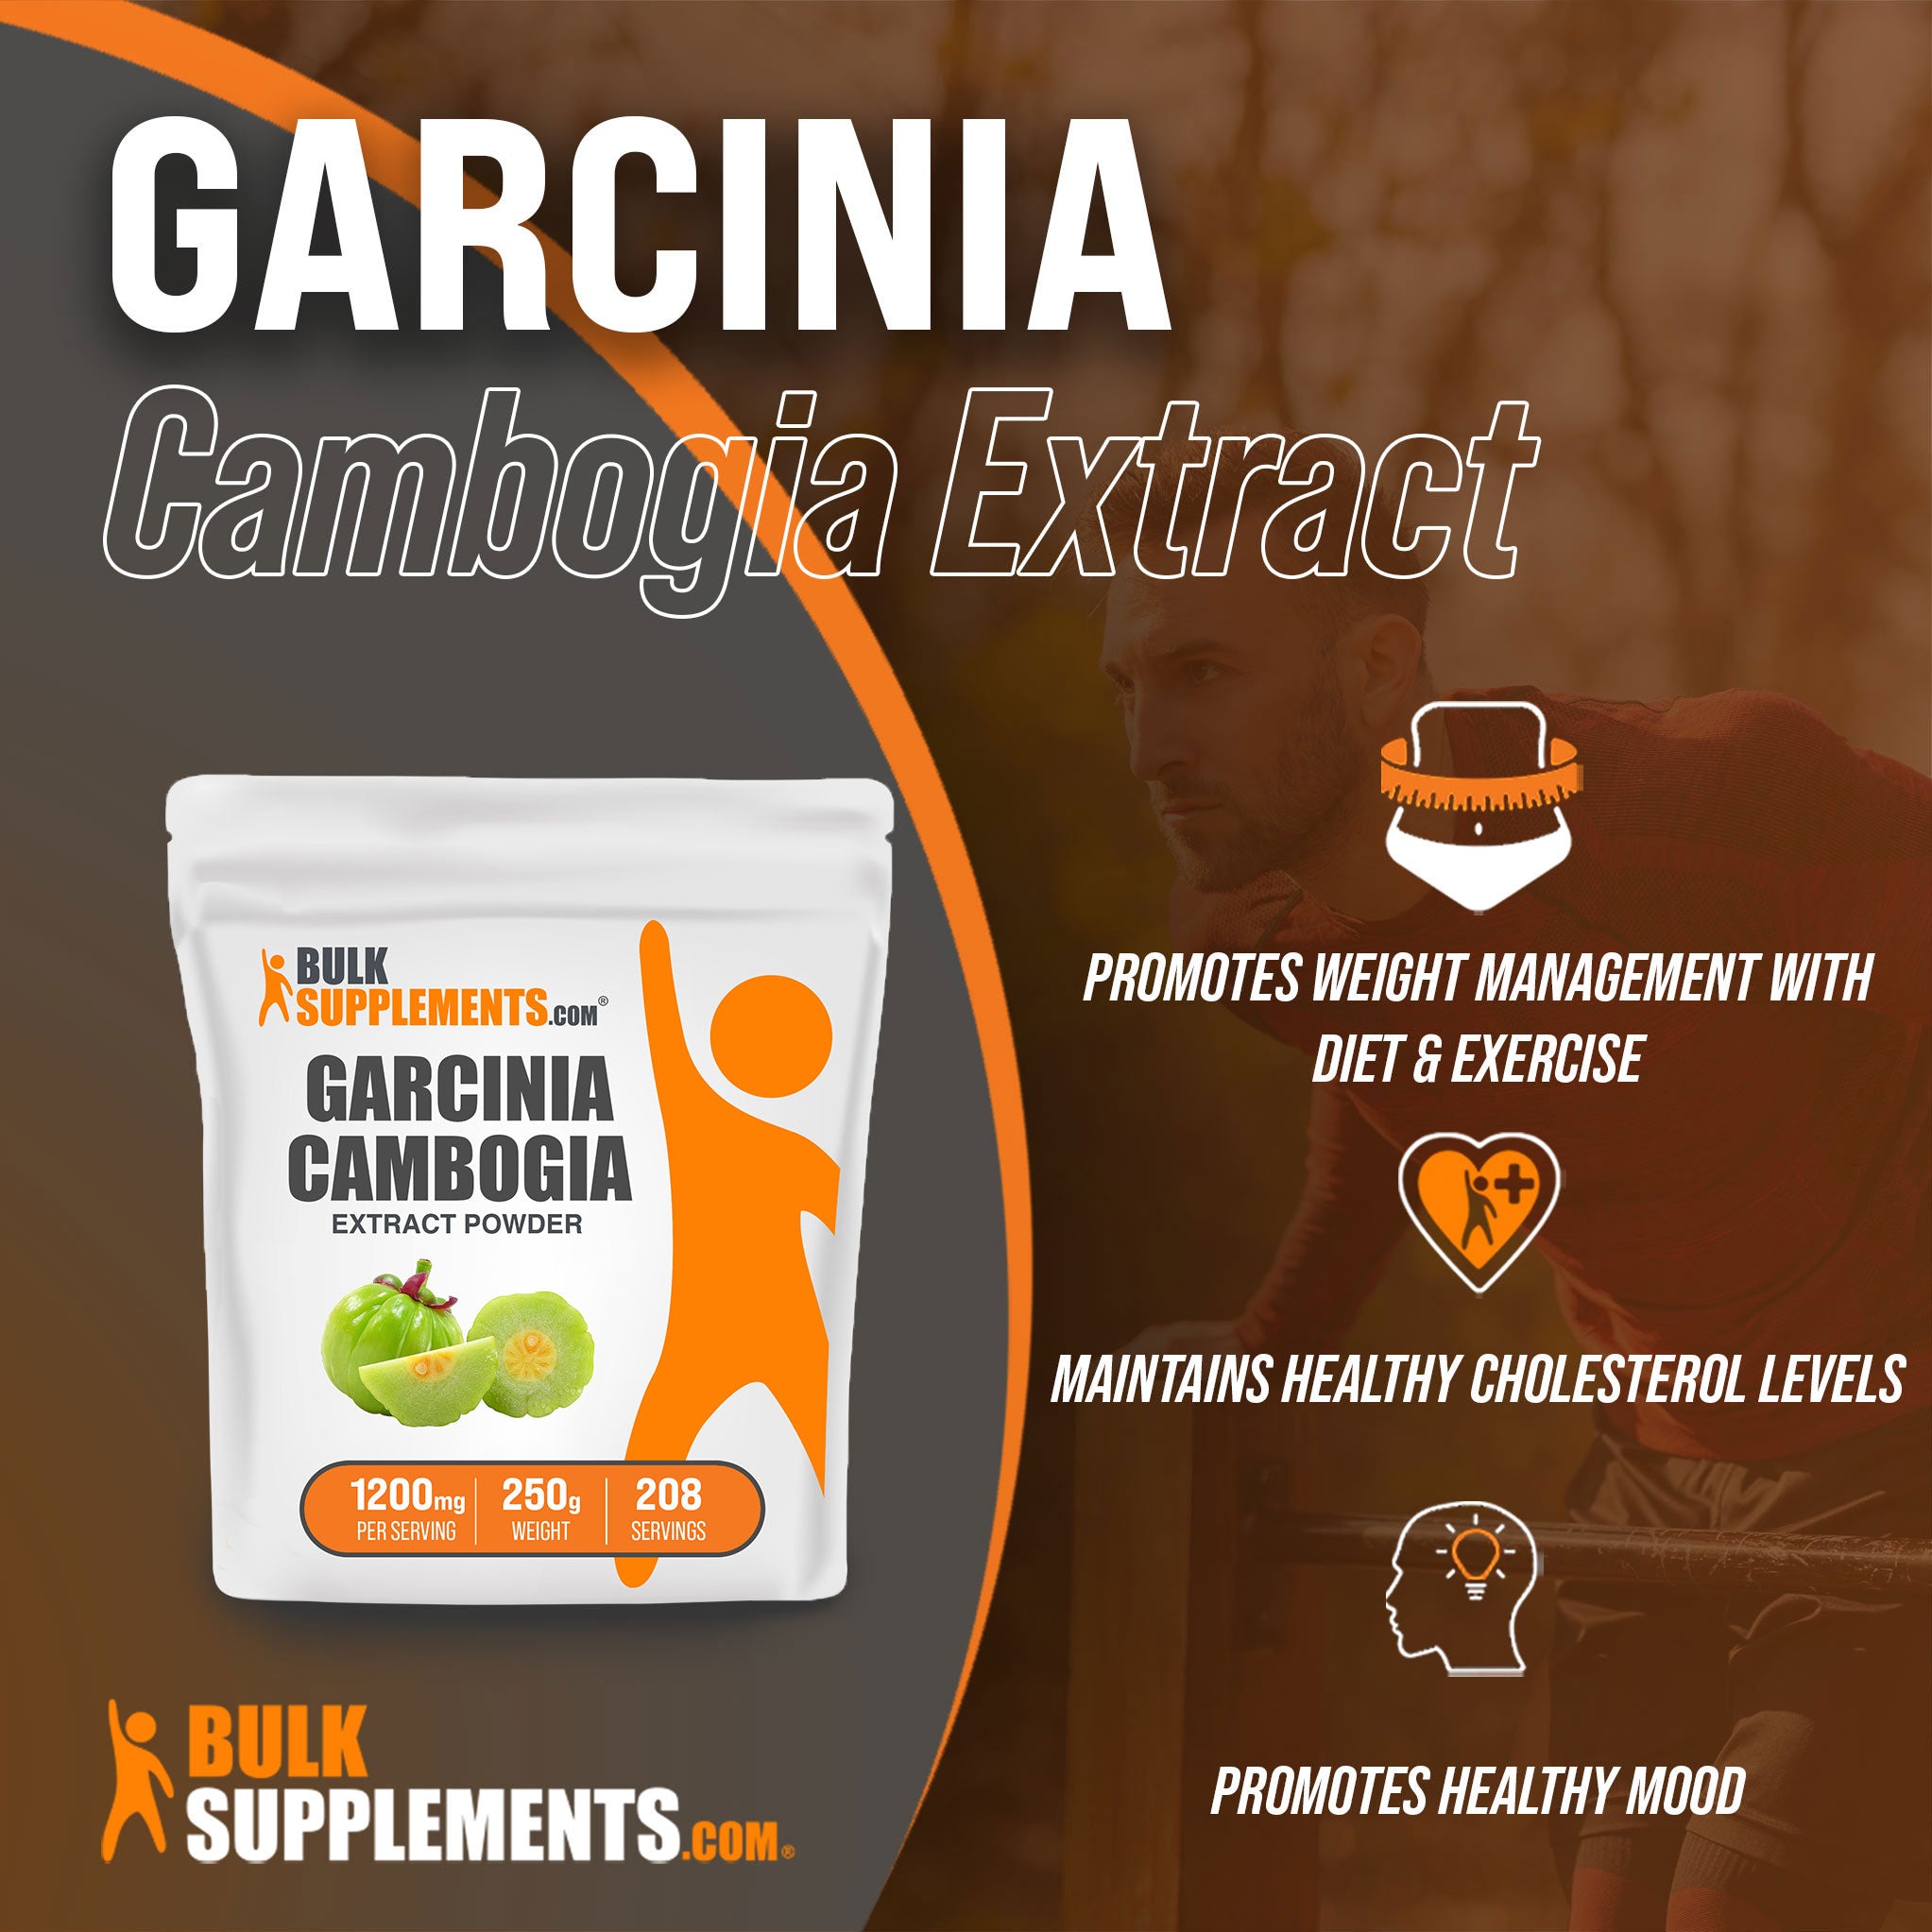 Benefits of Garcinia Cambogia Extract; promotes weight management with diet and exercise, maintains healthy cholesterol levels, promotes healthy mood